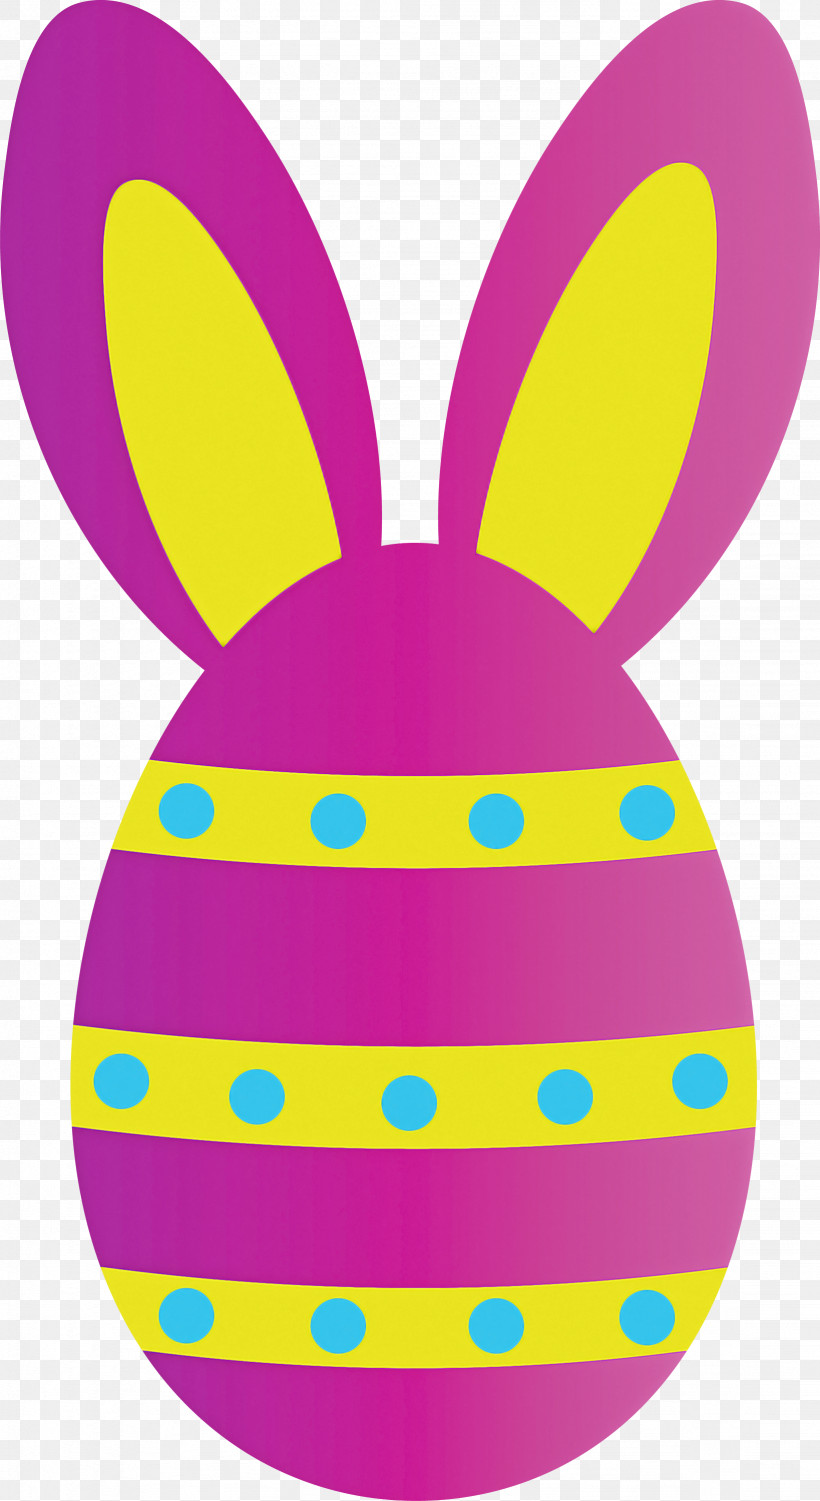 Easter Egg With Bunny Ears, PNG, 1638x3000px, Easter Egg With Bunny Ears, Easter Bunny, Easter Egg, Magenta, Rabbit Download Free